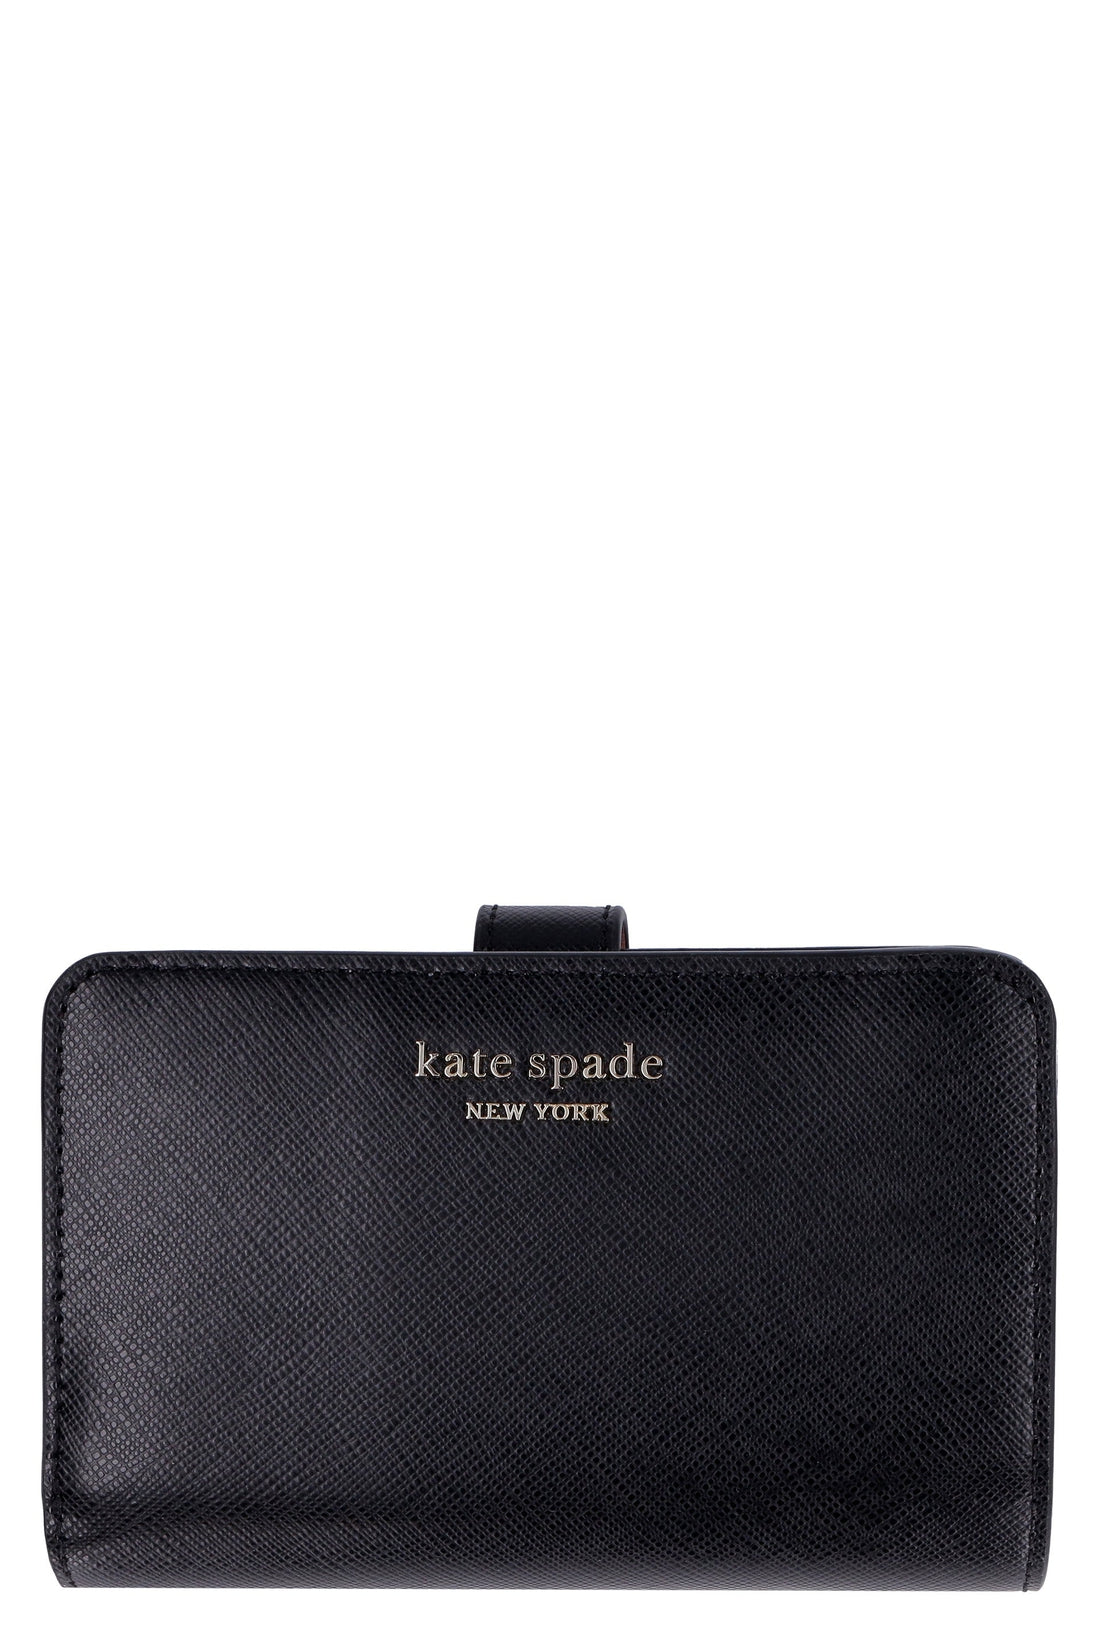 Kate Spade New York-OUTLET-SALE-Saffiano leather Spencer wallet-ARCHIVIST